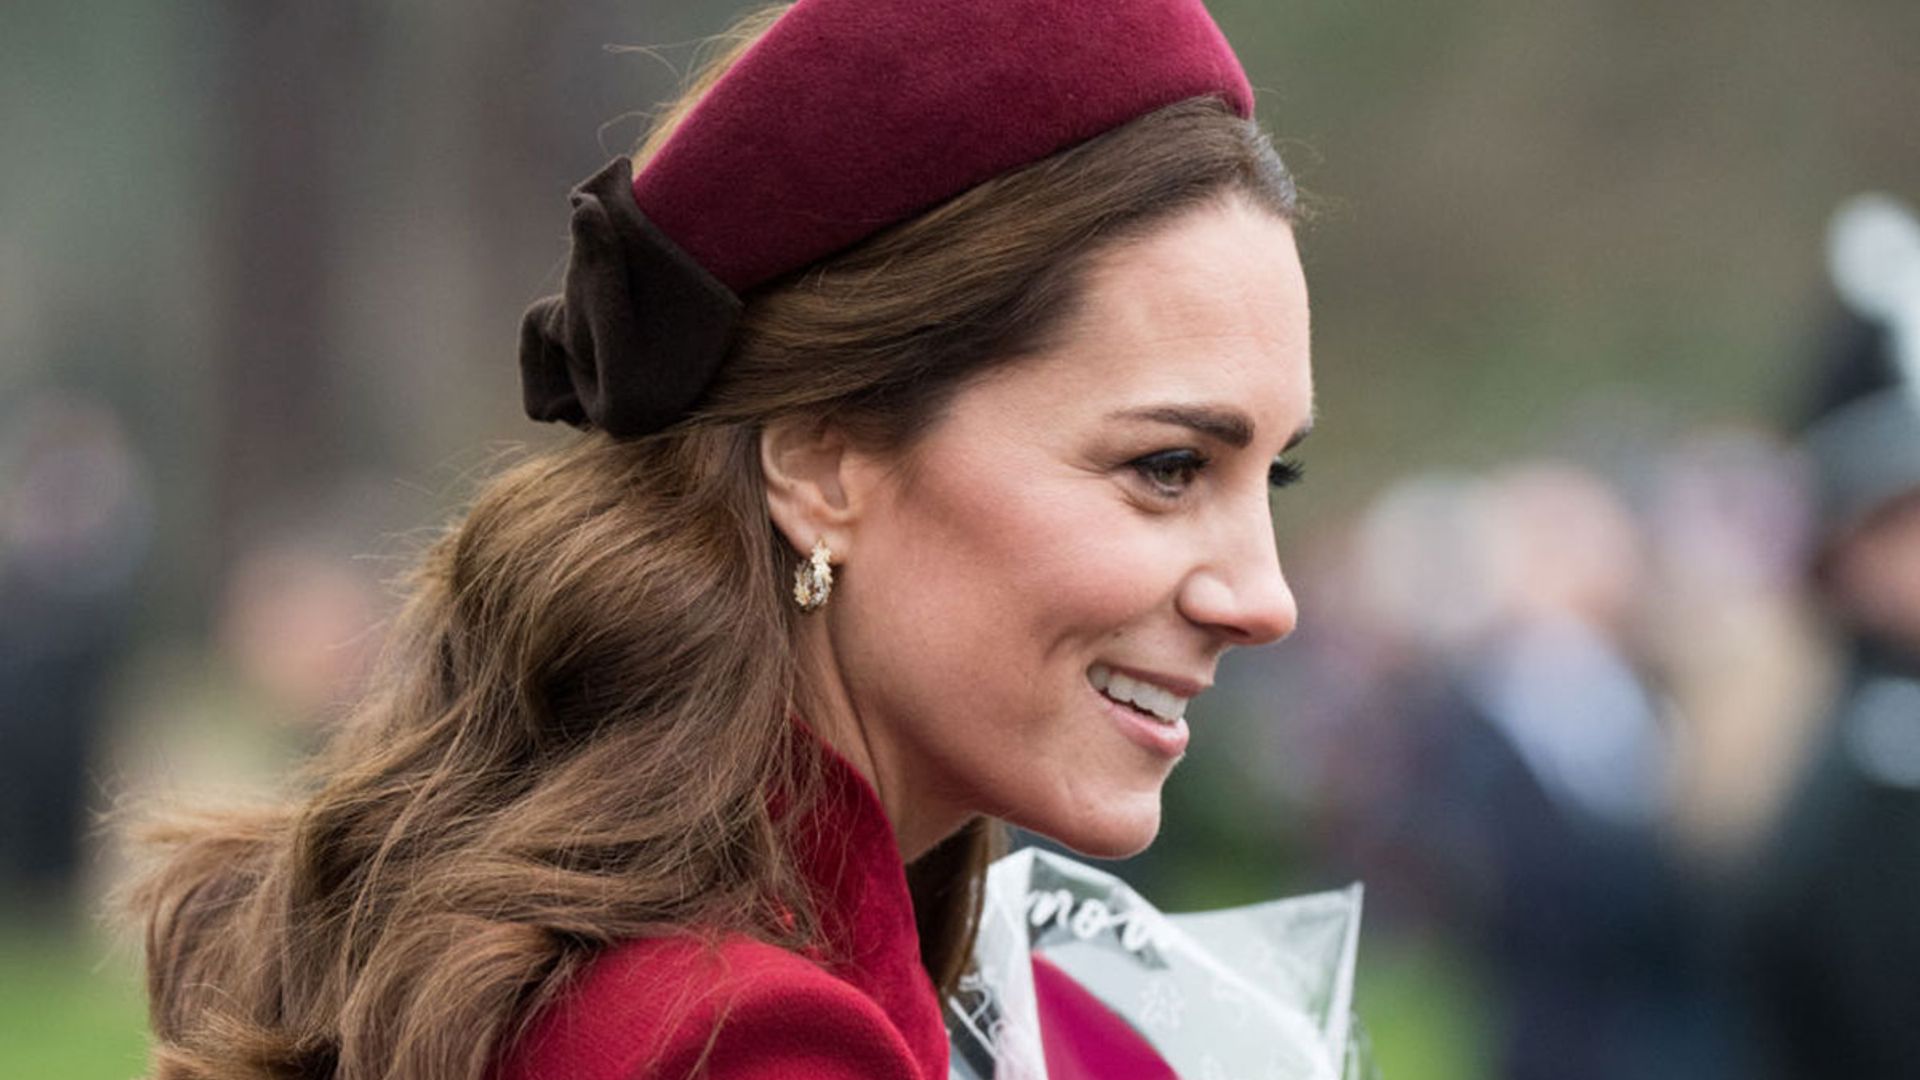 Kate Middleton makes stylish appearance at Christmas Day church service